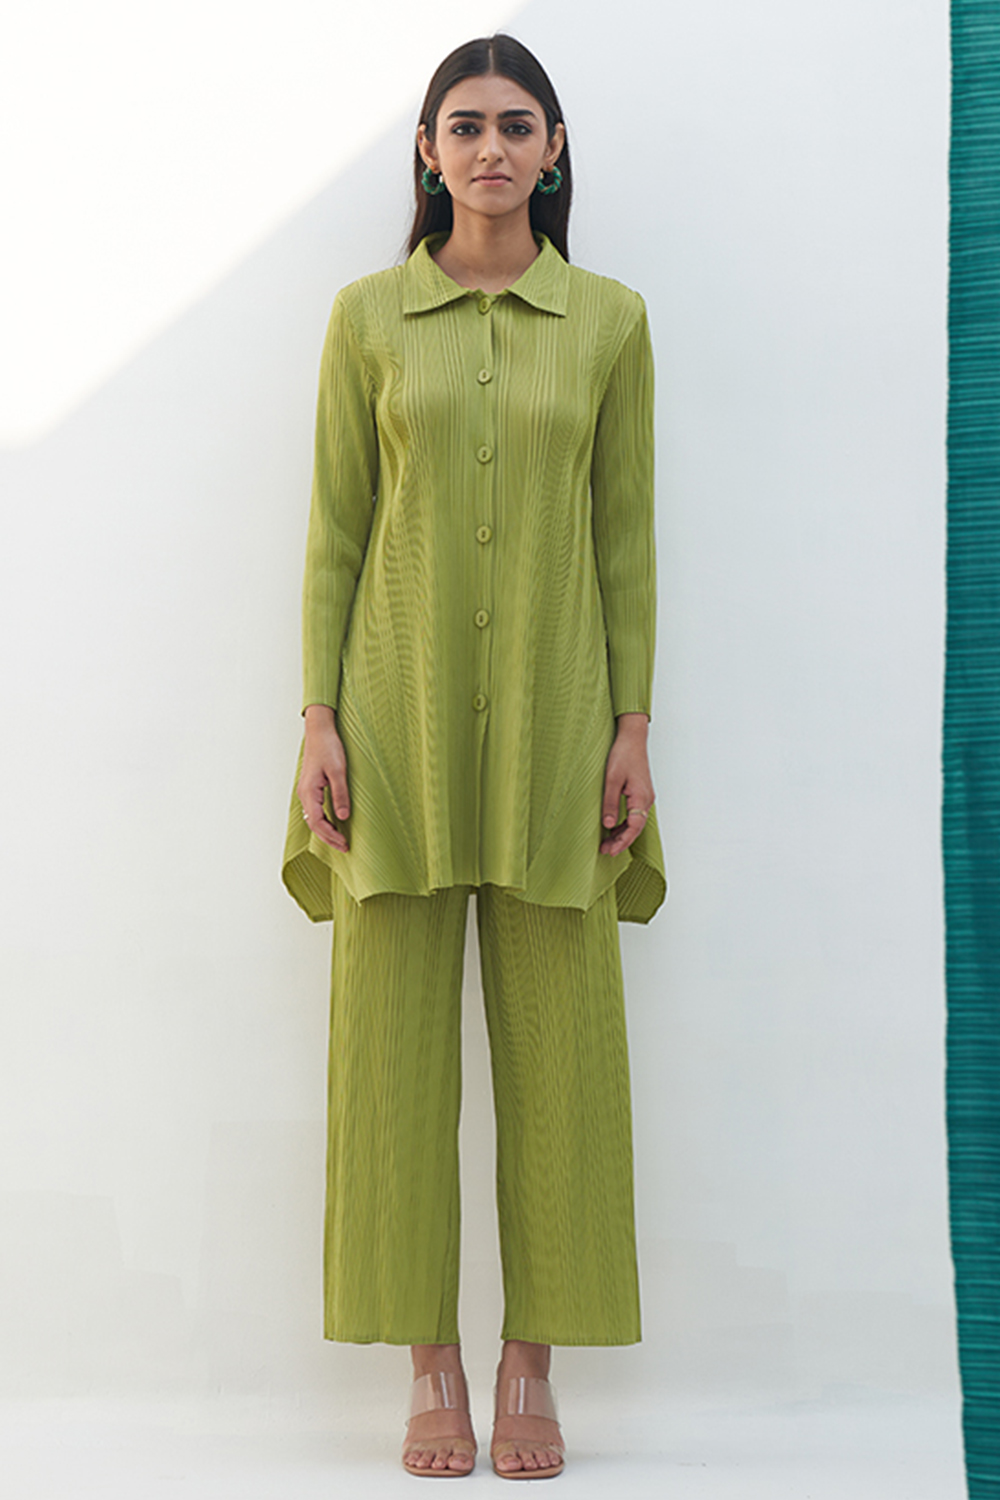 PLEATS BY ARUNI presents Limegreen French Pleated Coord Set exclusively at  FEI